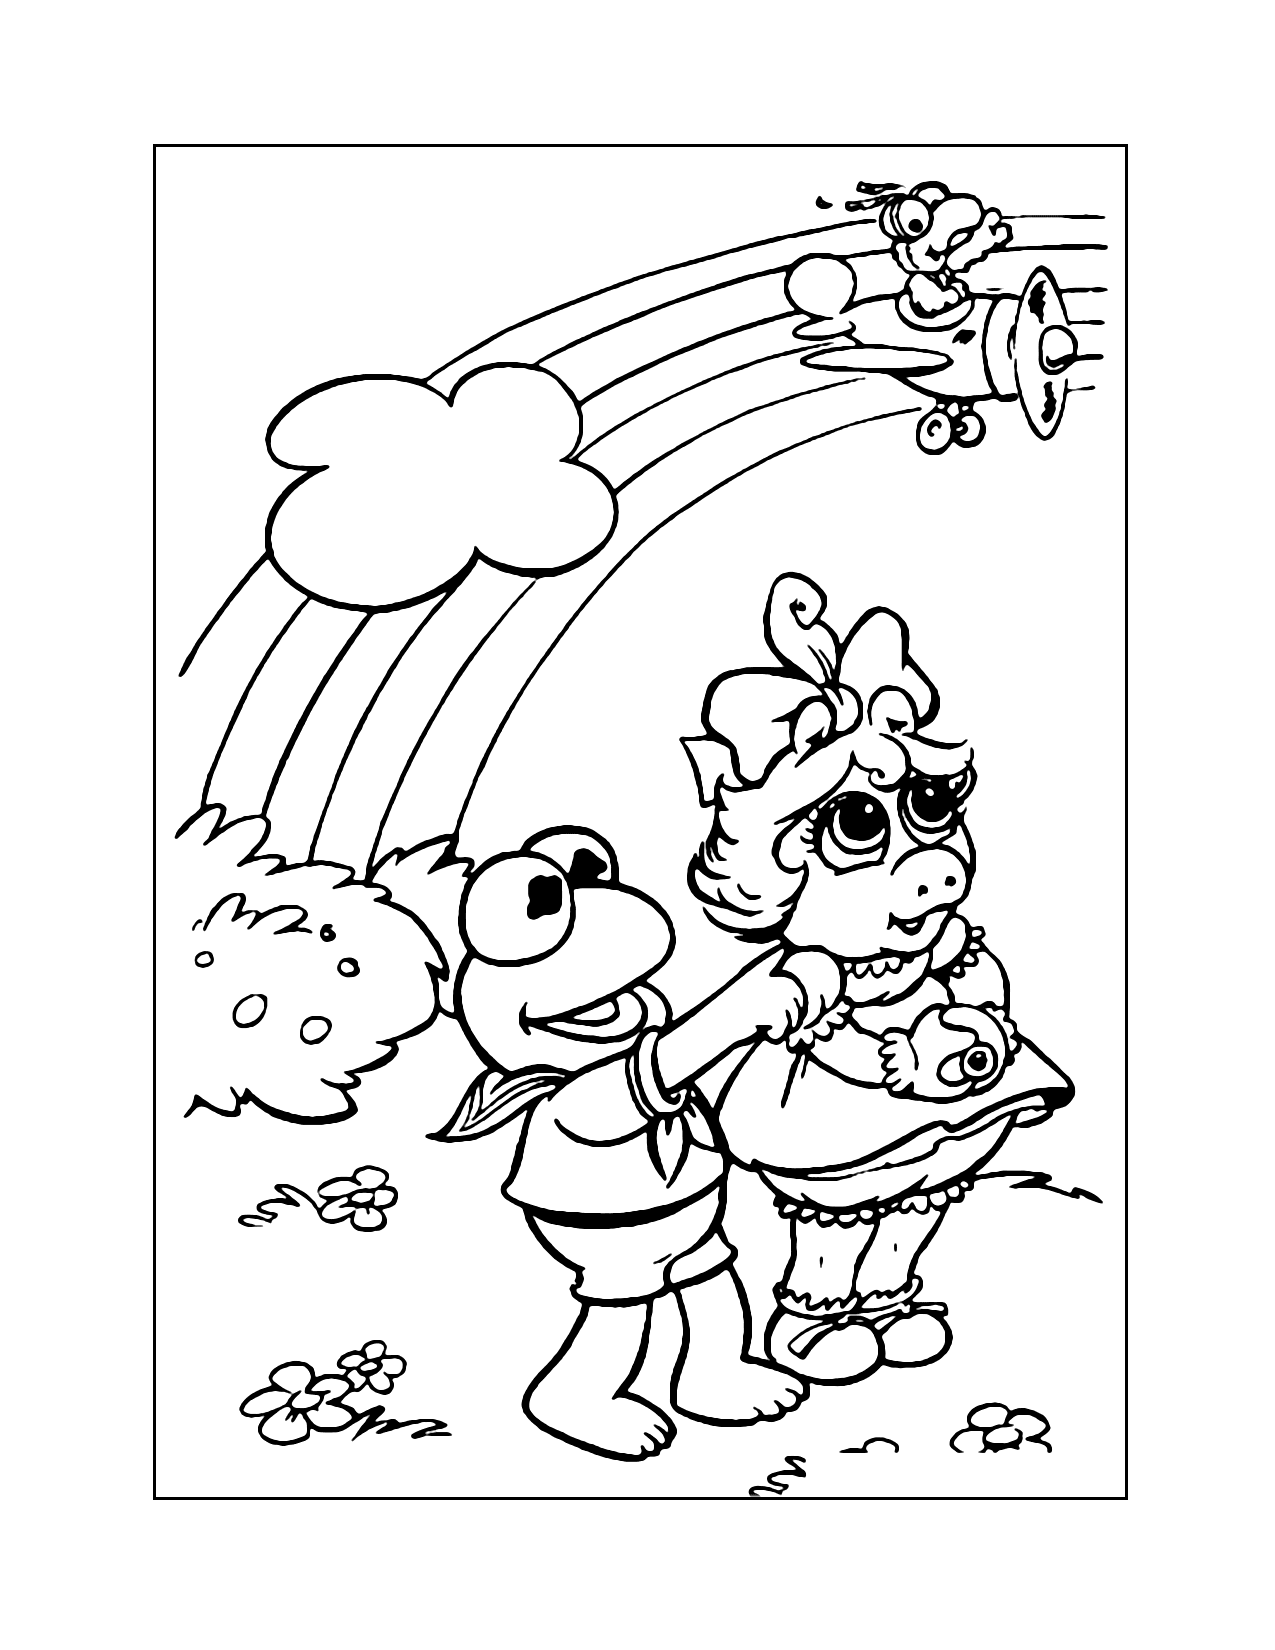 Kermit Piggy And Gonzo Muppet Babies Airplane Coloring Page